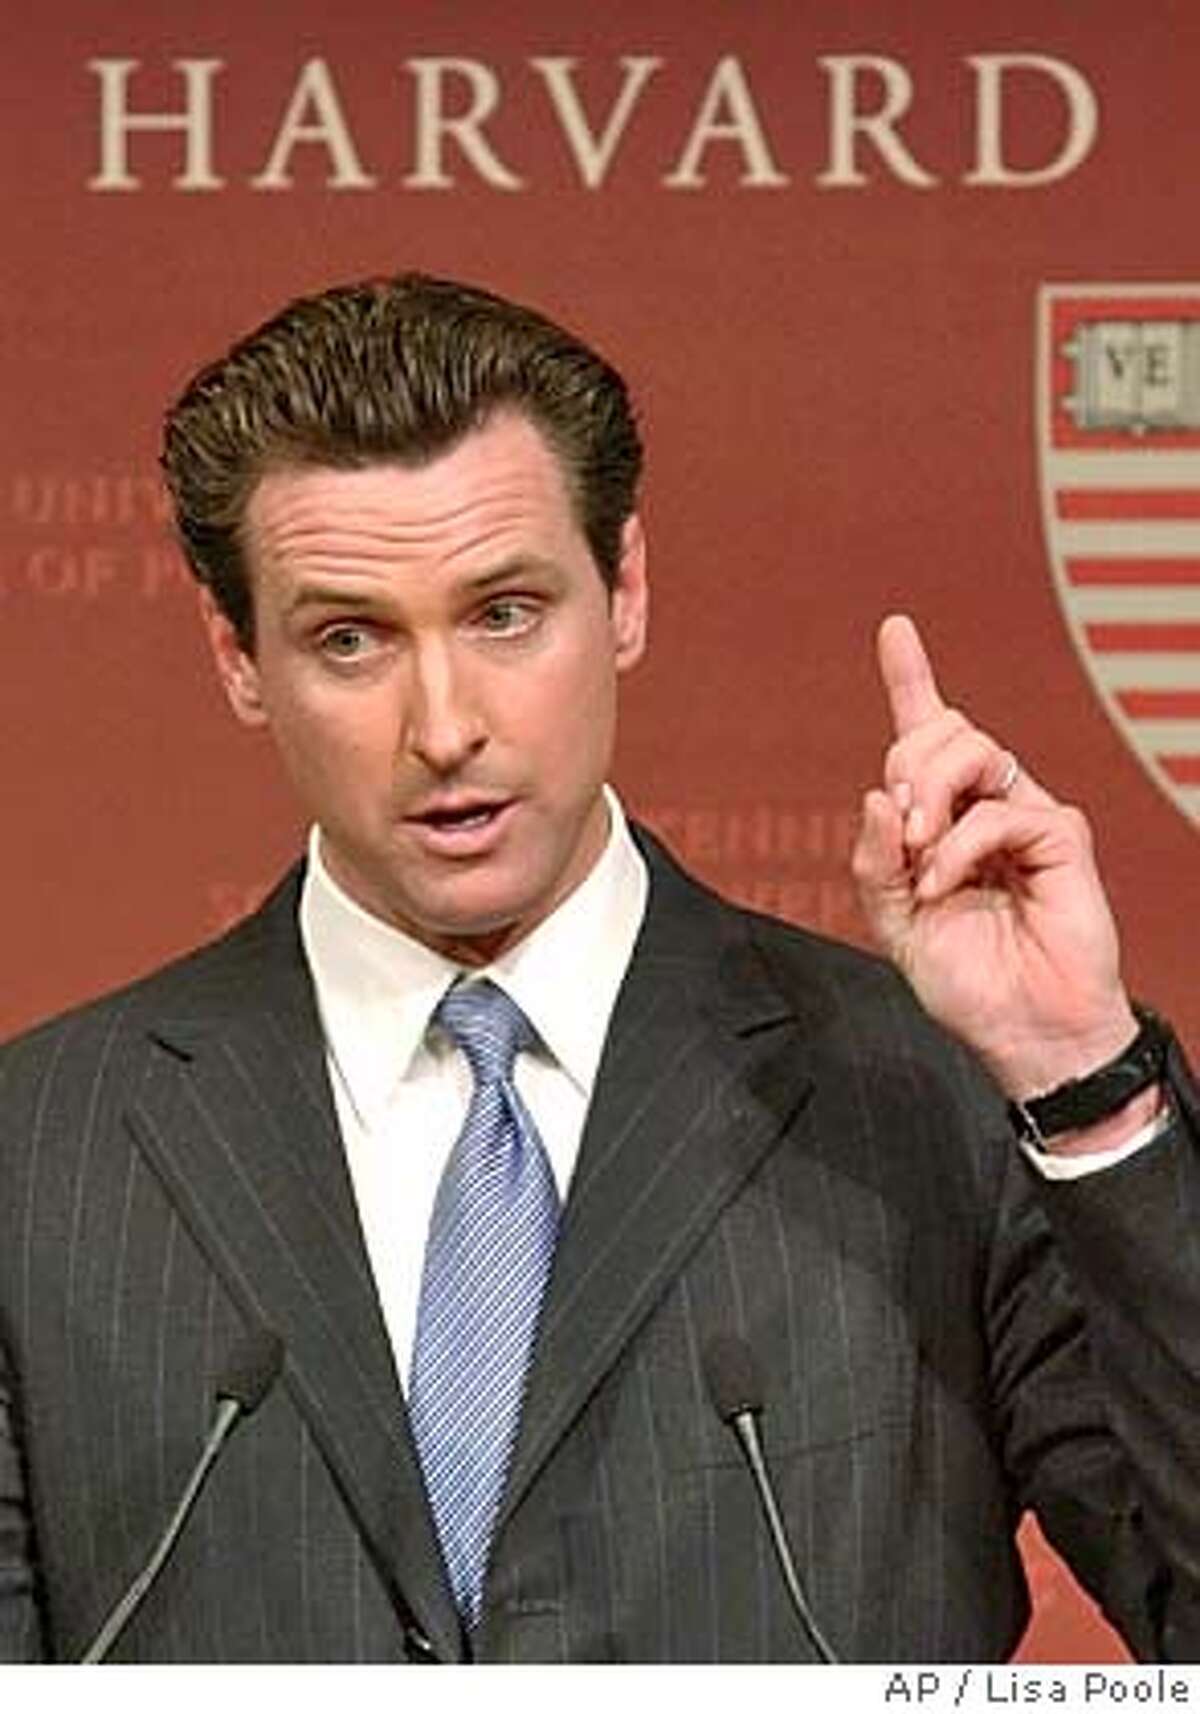 San Francisco Mayor Gavin Newsom speaks during a forum titled "Same Sex Marriage and Equality in America," at Harvard University's Kennedy School of Government, Tuesday, Feb. 8, 2005 in Cambridge, Mass. (AP Photo/Lisa Poole)